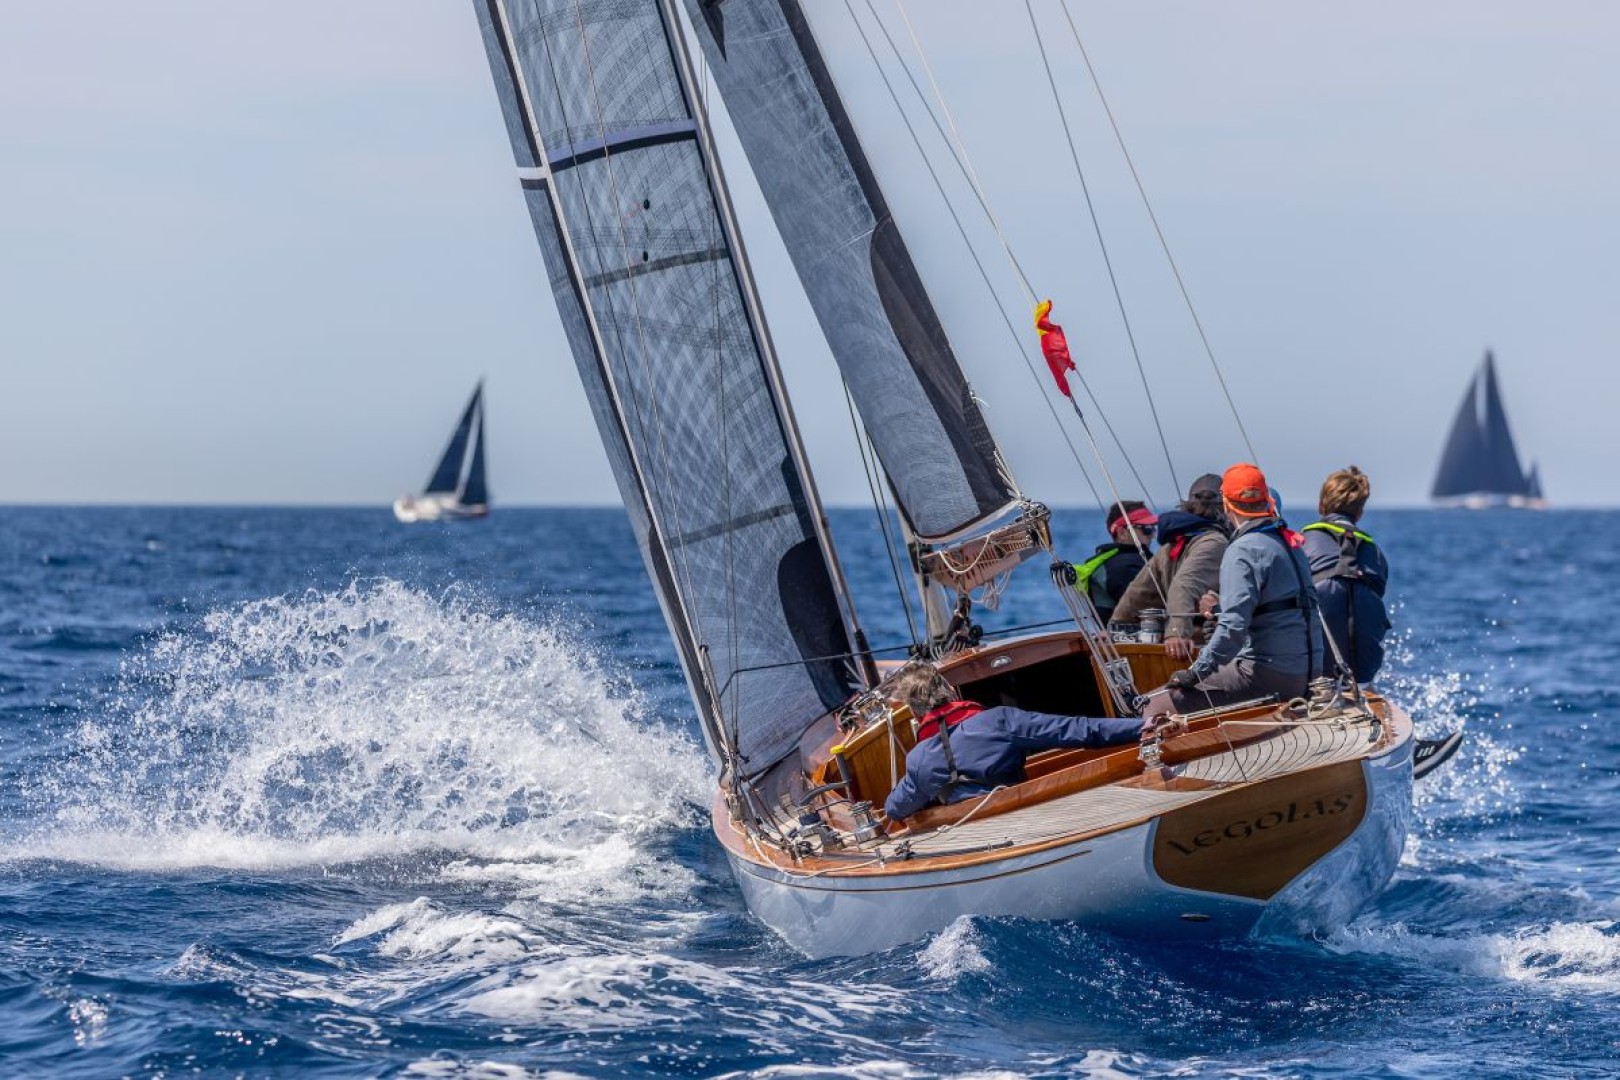 The Classic and Traditional Yacht fleets even stronger in the 19th edition of PalmaVela